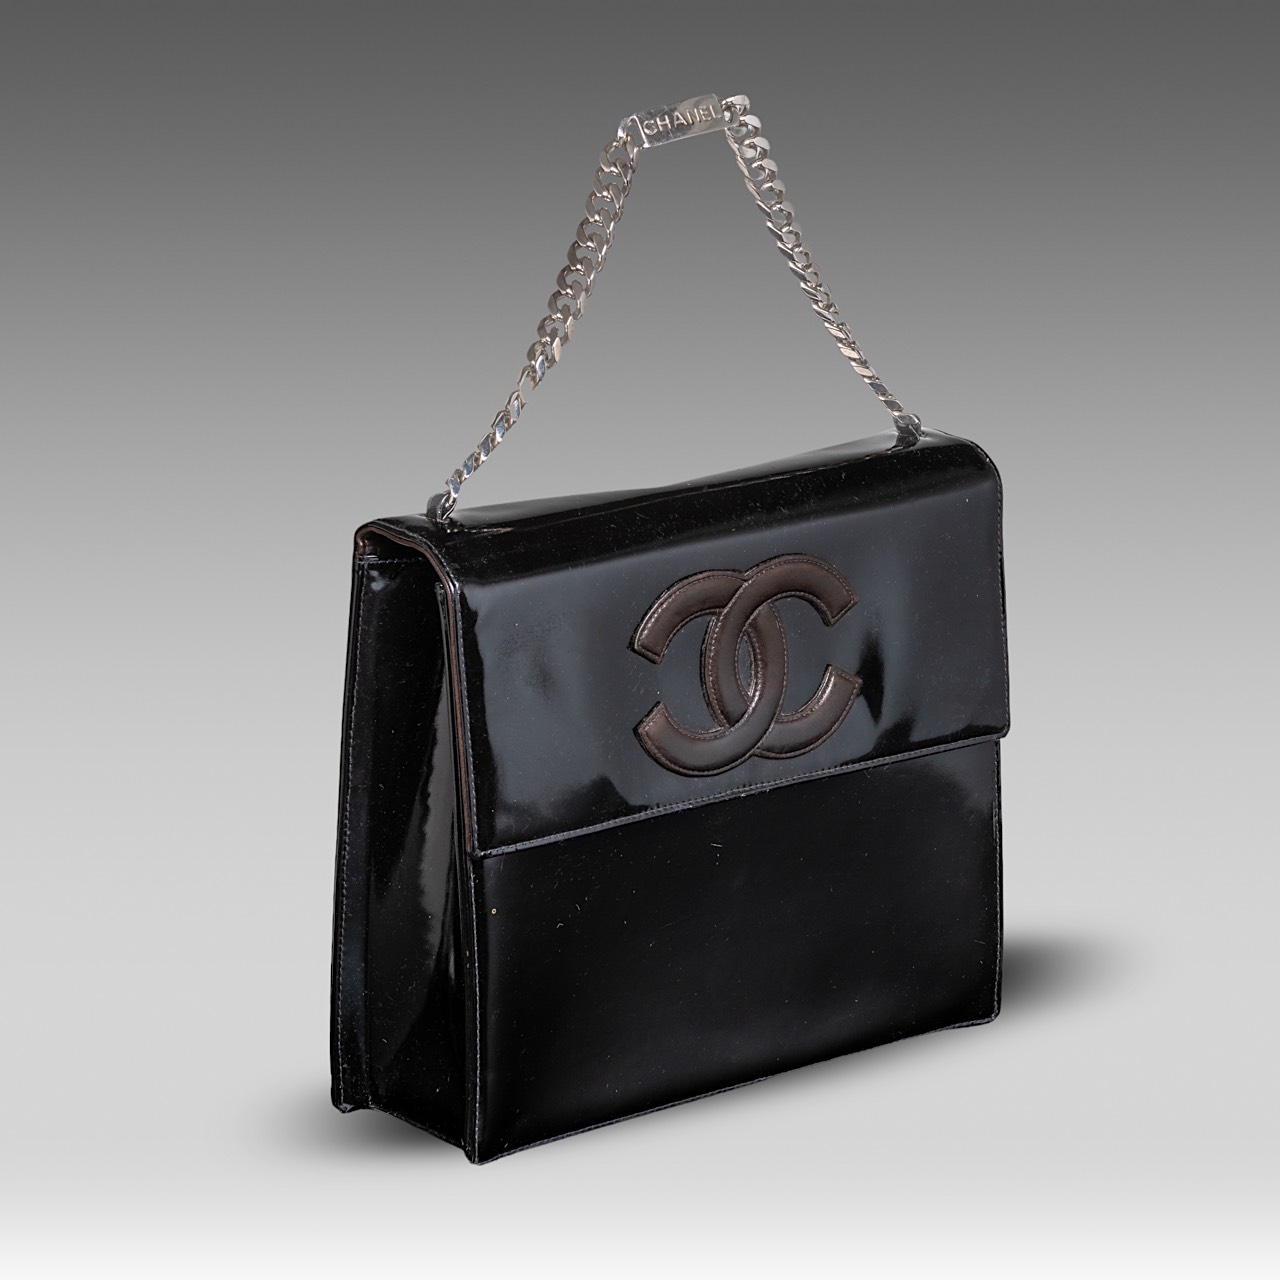 A Chanel flap handbag in black patent leather, H 22 - W 25 - D 8 cm - Image 6 of 10